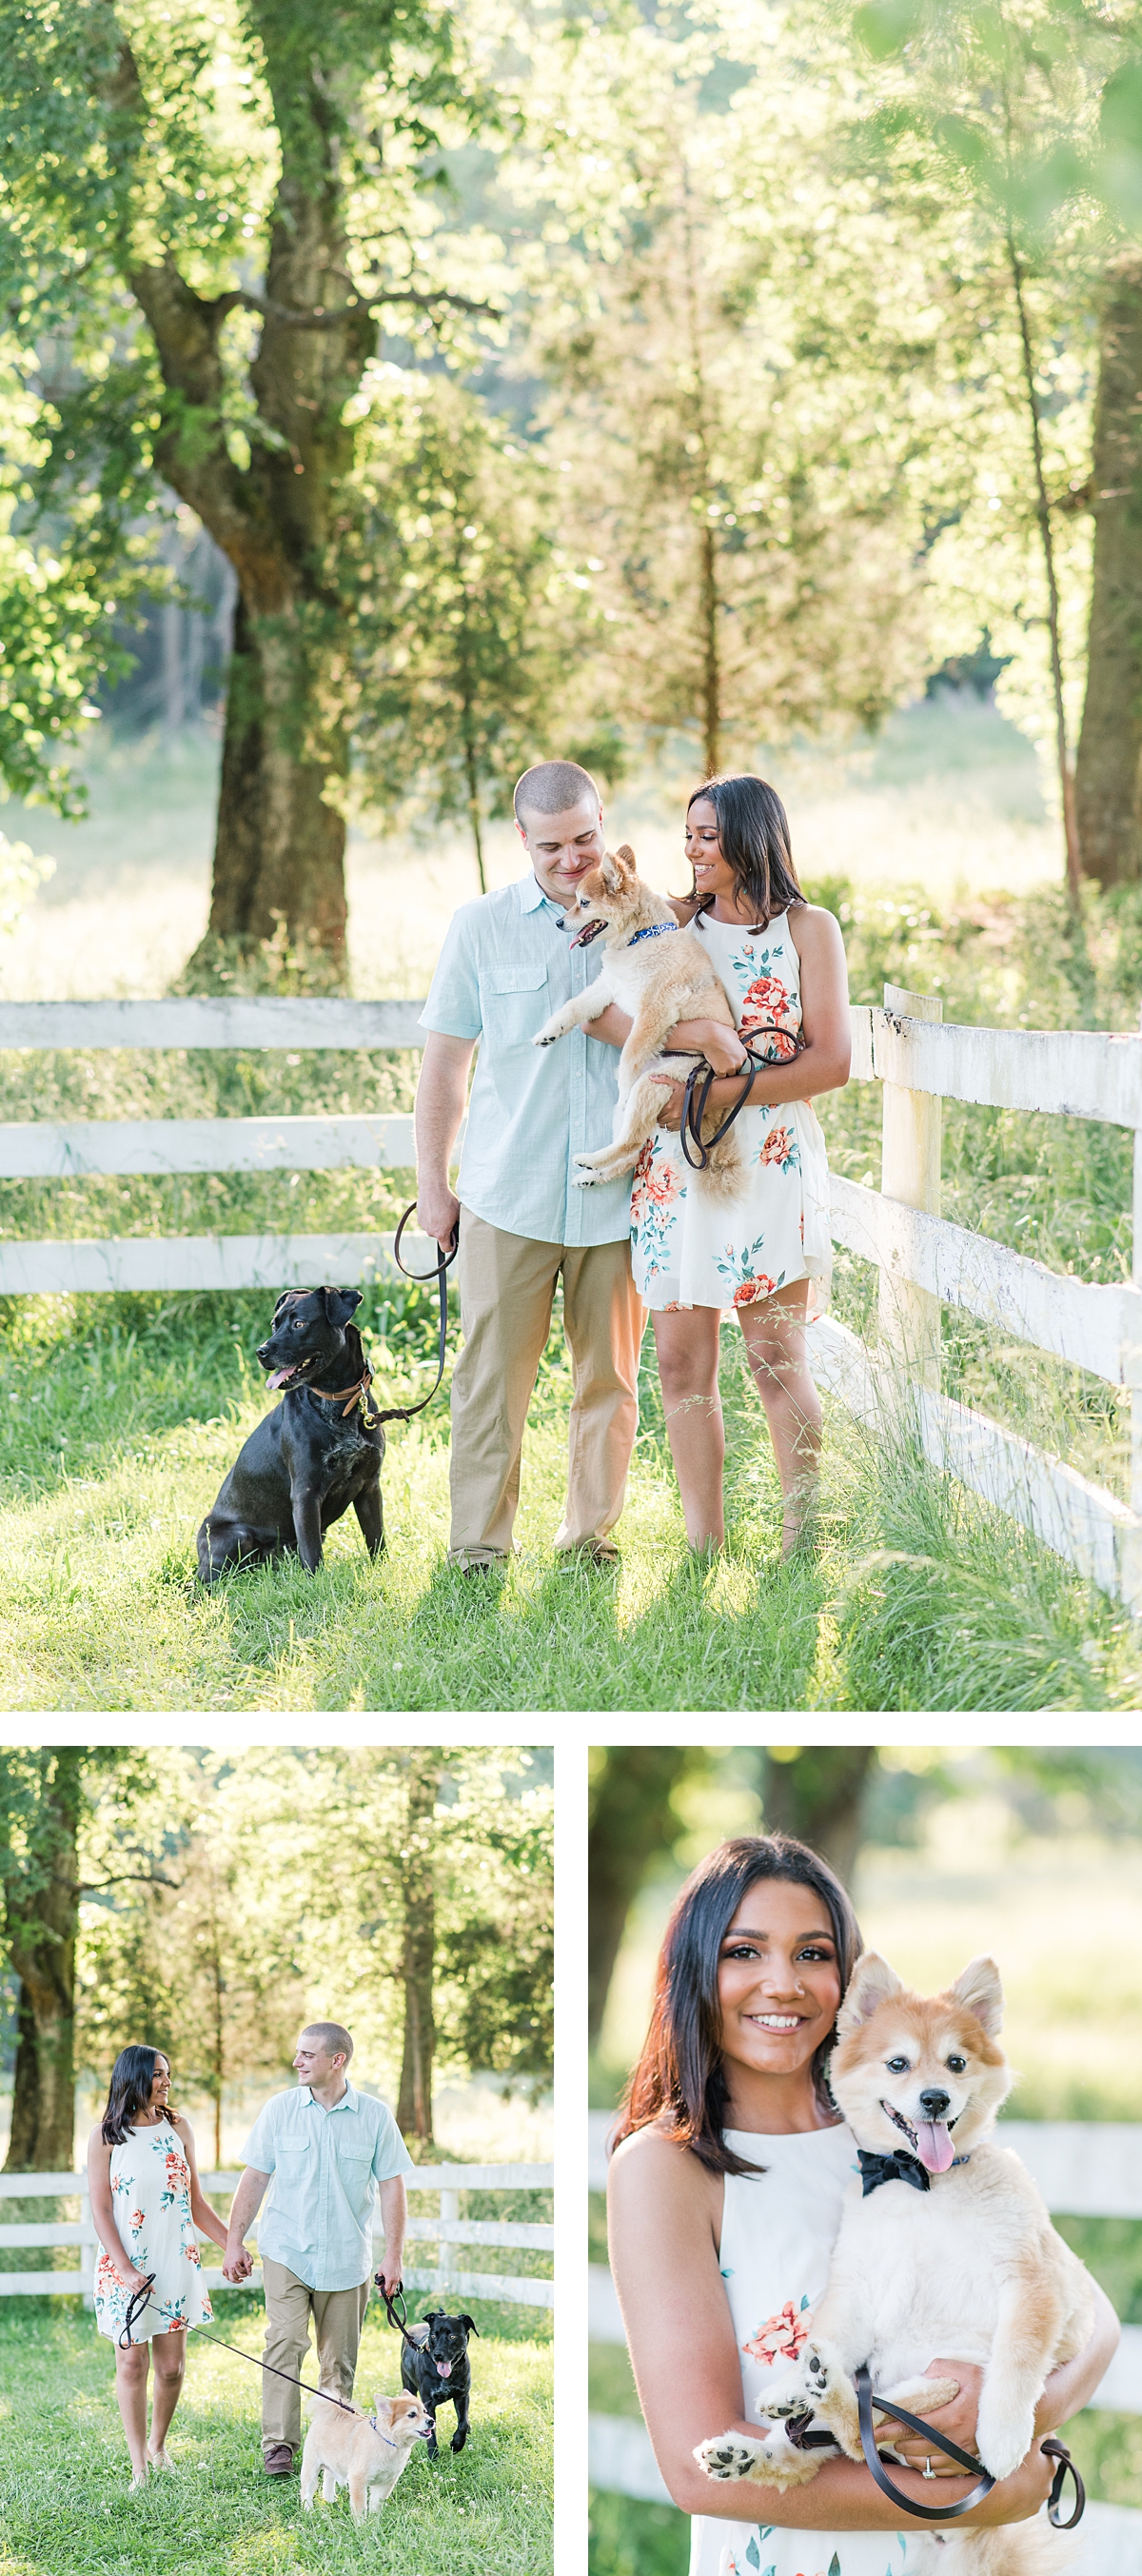 Tuckahoe Plantation Engagement Session with Dogs. Photography by Richmond Wedding Photographer Kailey Brianne Photography.